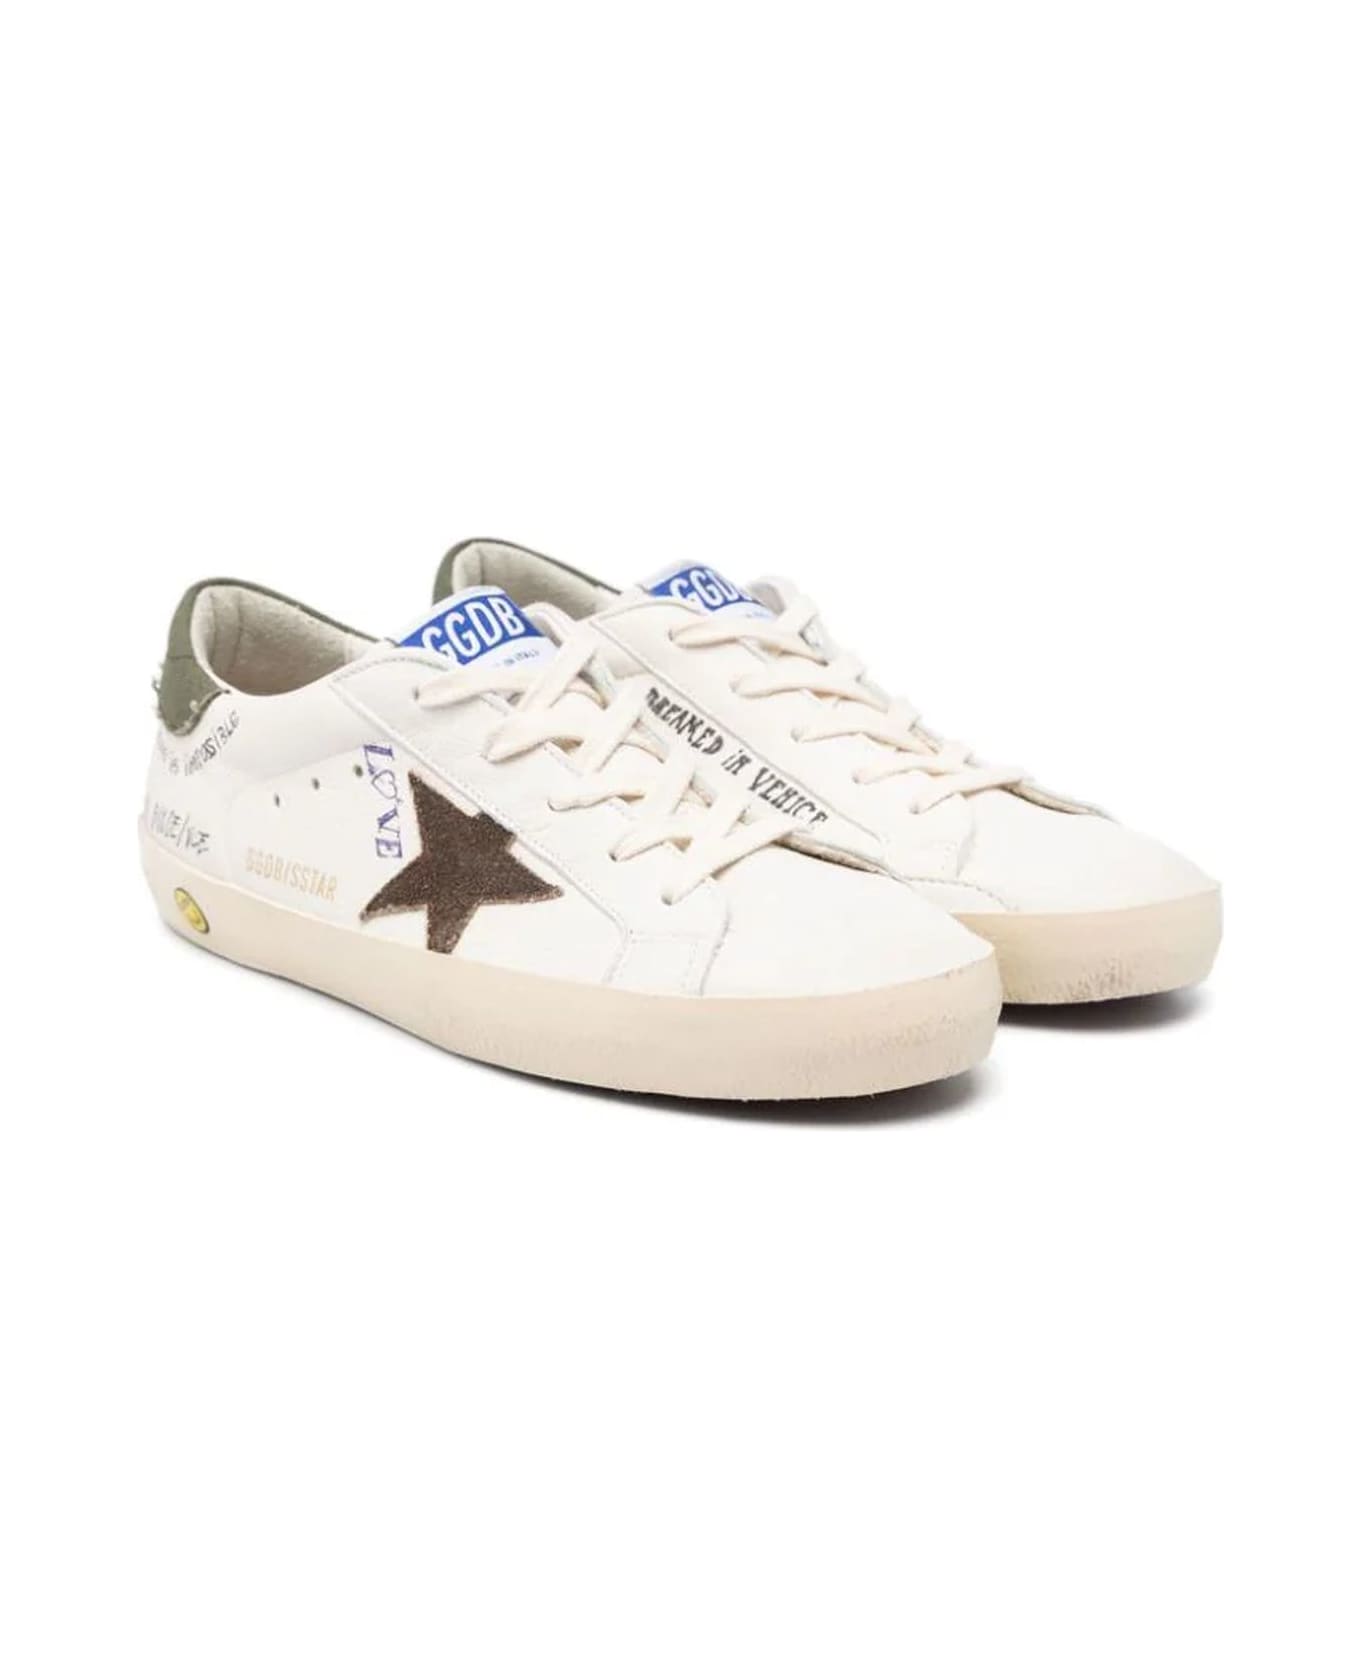 Golden Goose White Leather Sneakers - White/brown/green